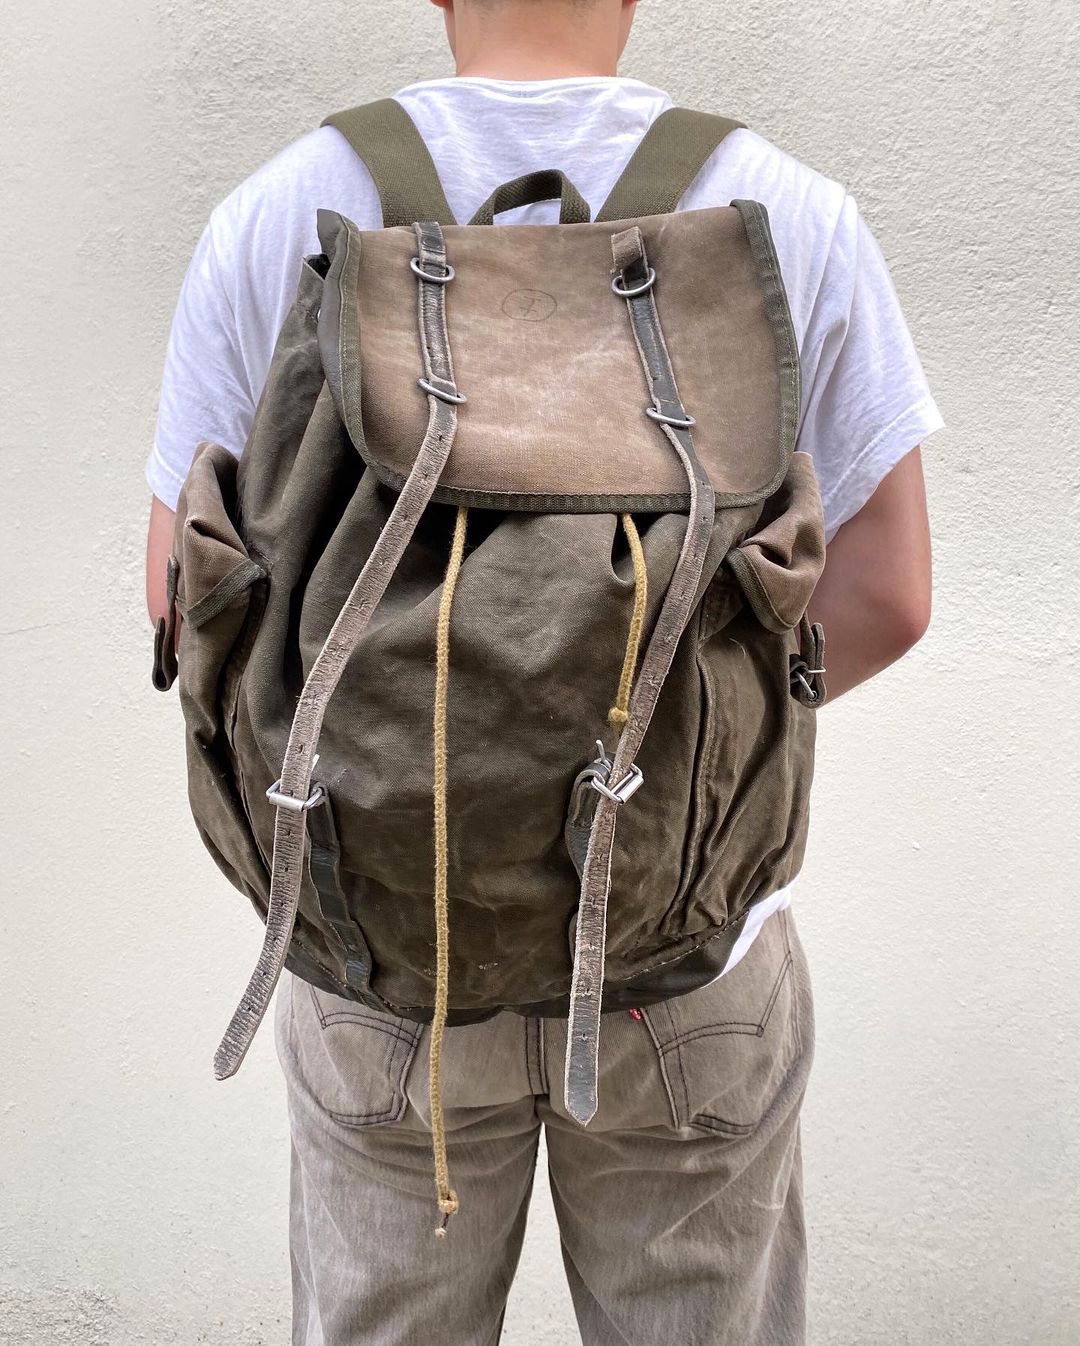 1940S WWII EUROPE ARMY RUCKSACK BACKPACK (OS)